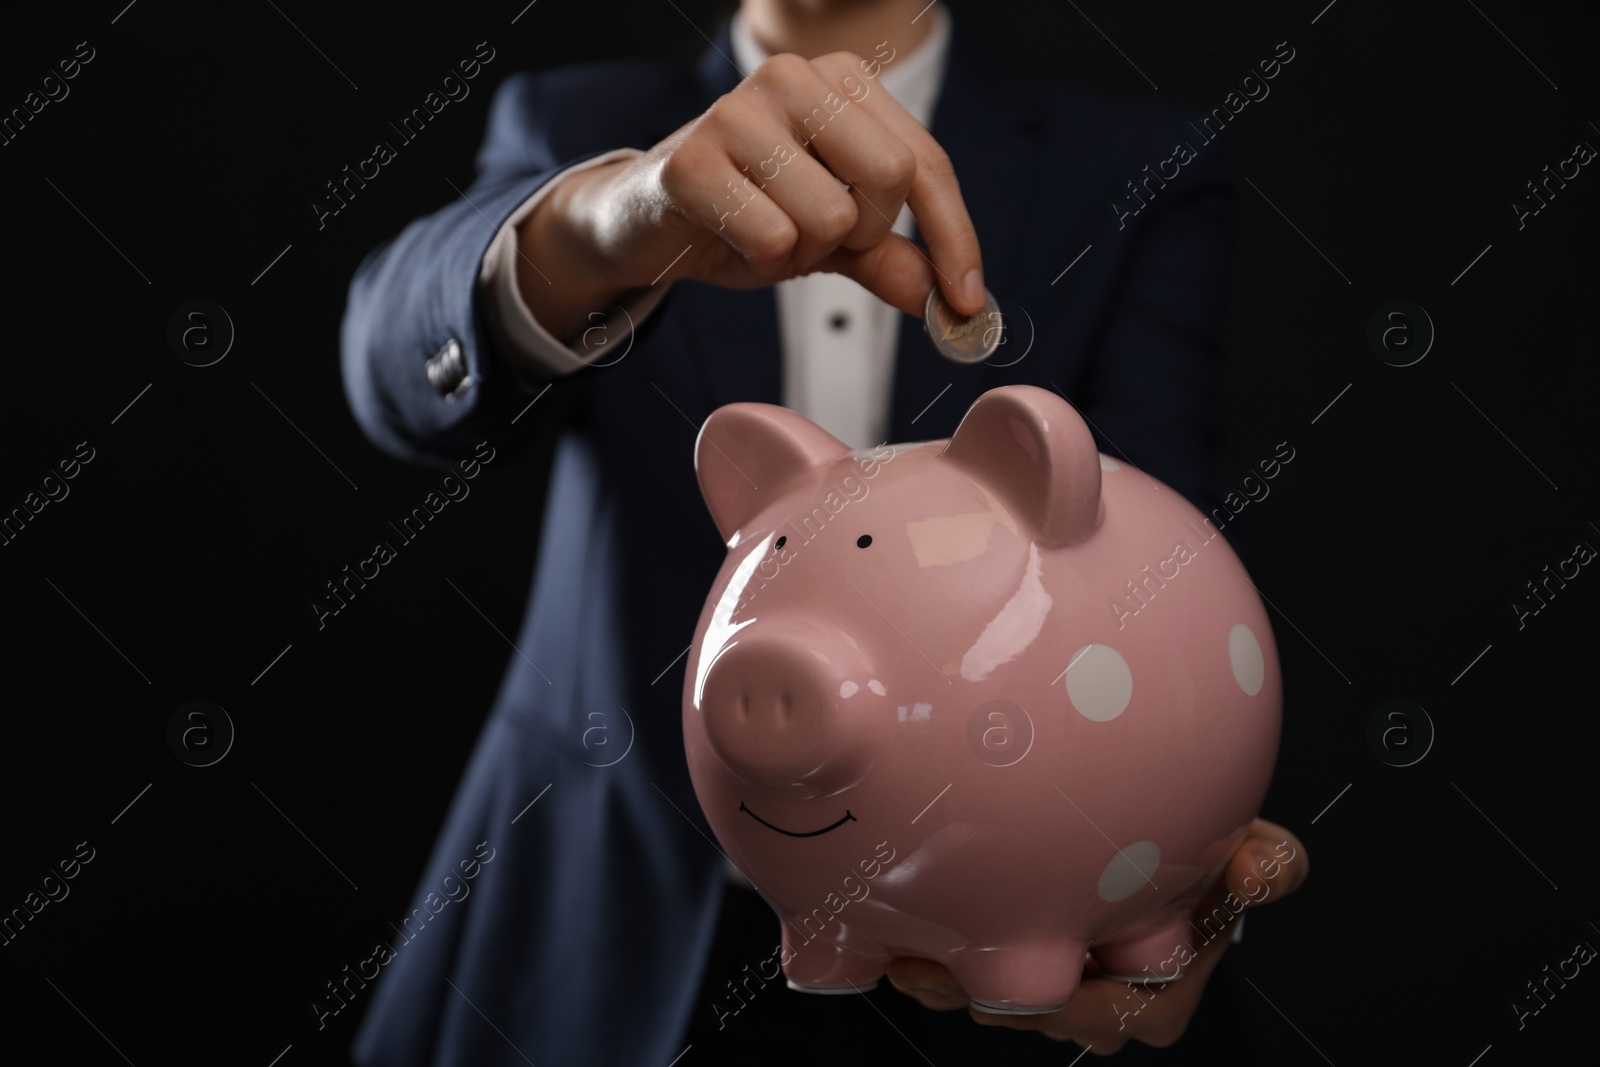 Photo of Woman putting coin into piggy bank on black background, closeup